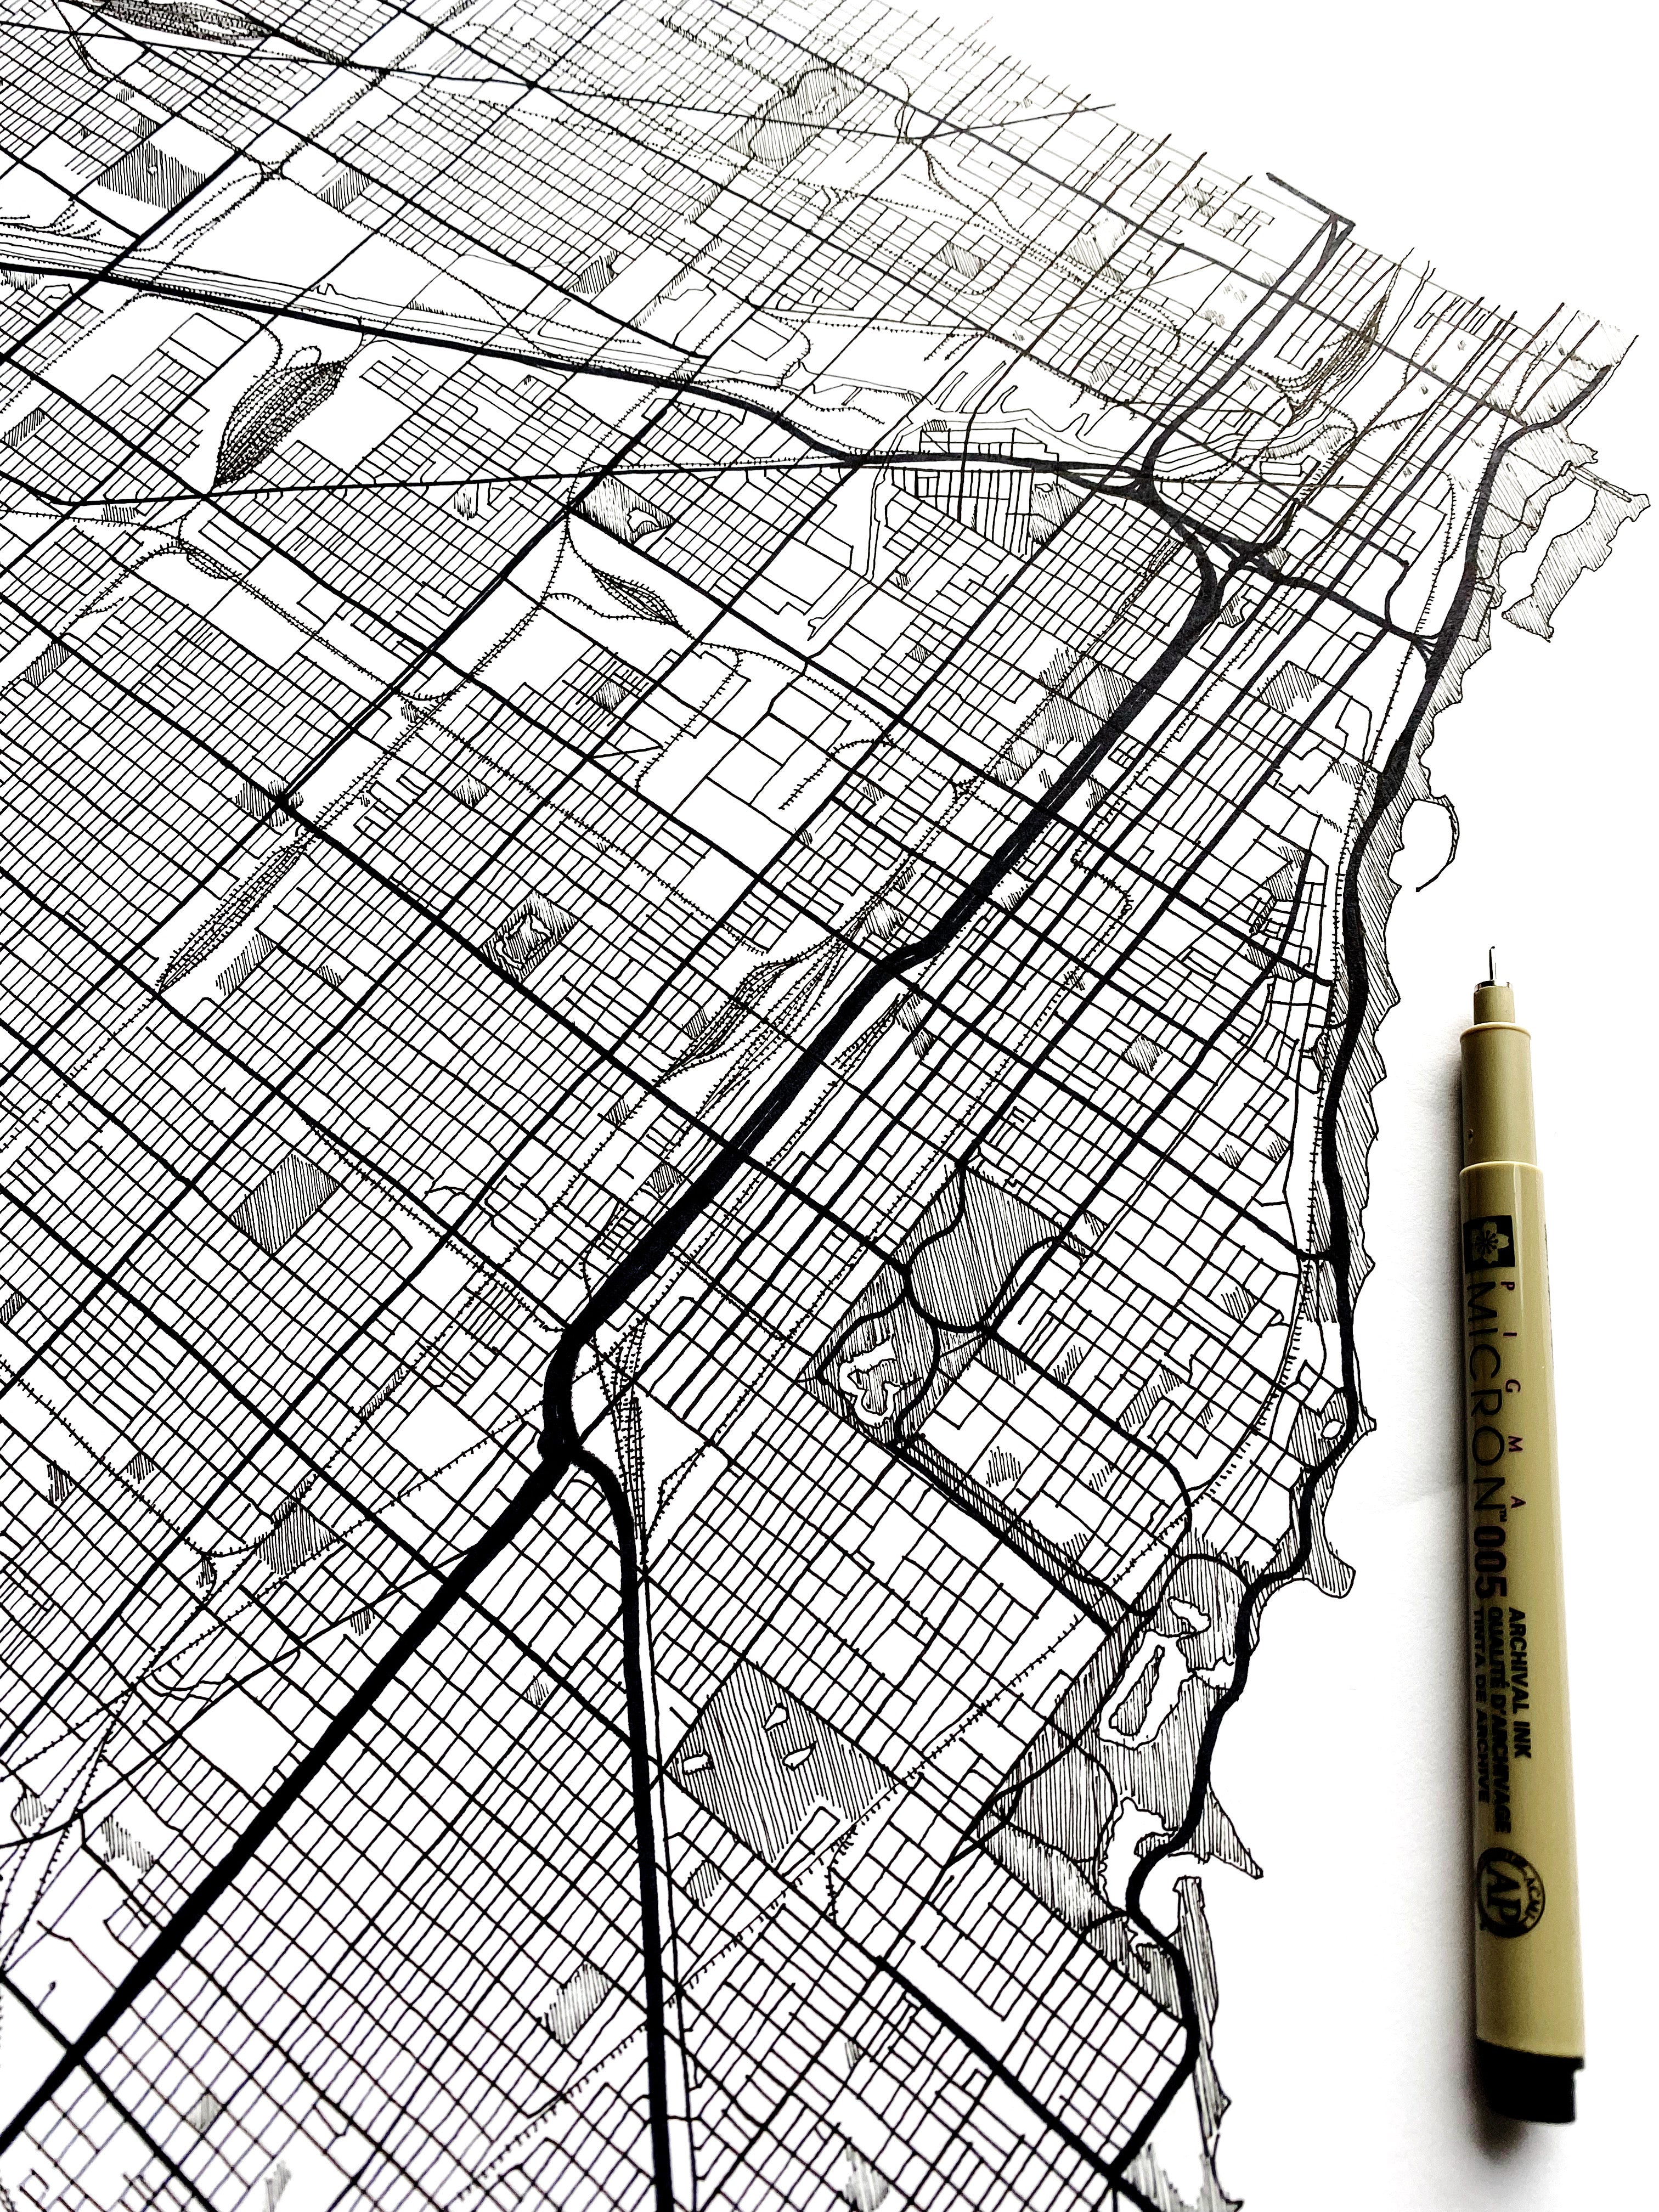 Greater CHICAGO City Lines Map: PRINT